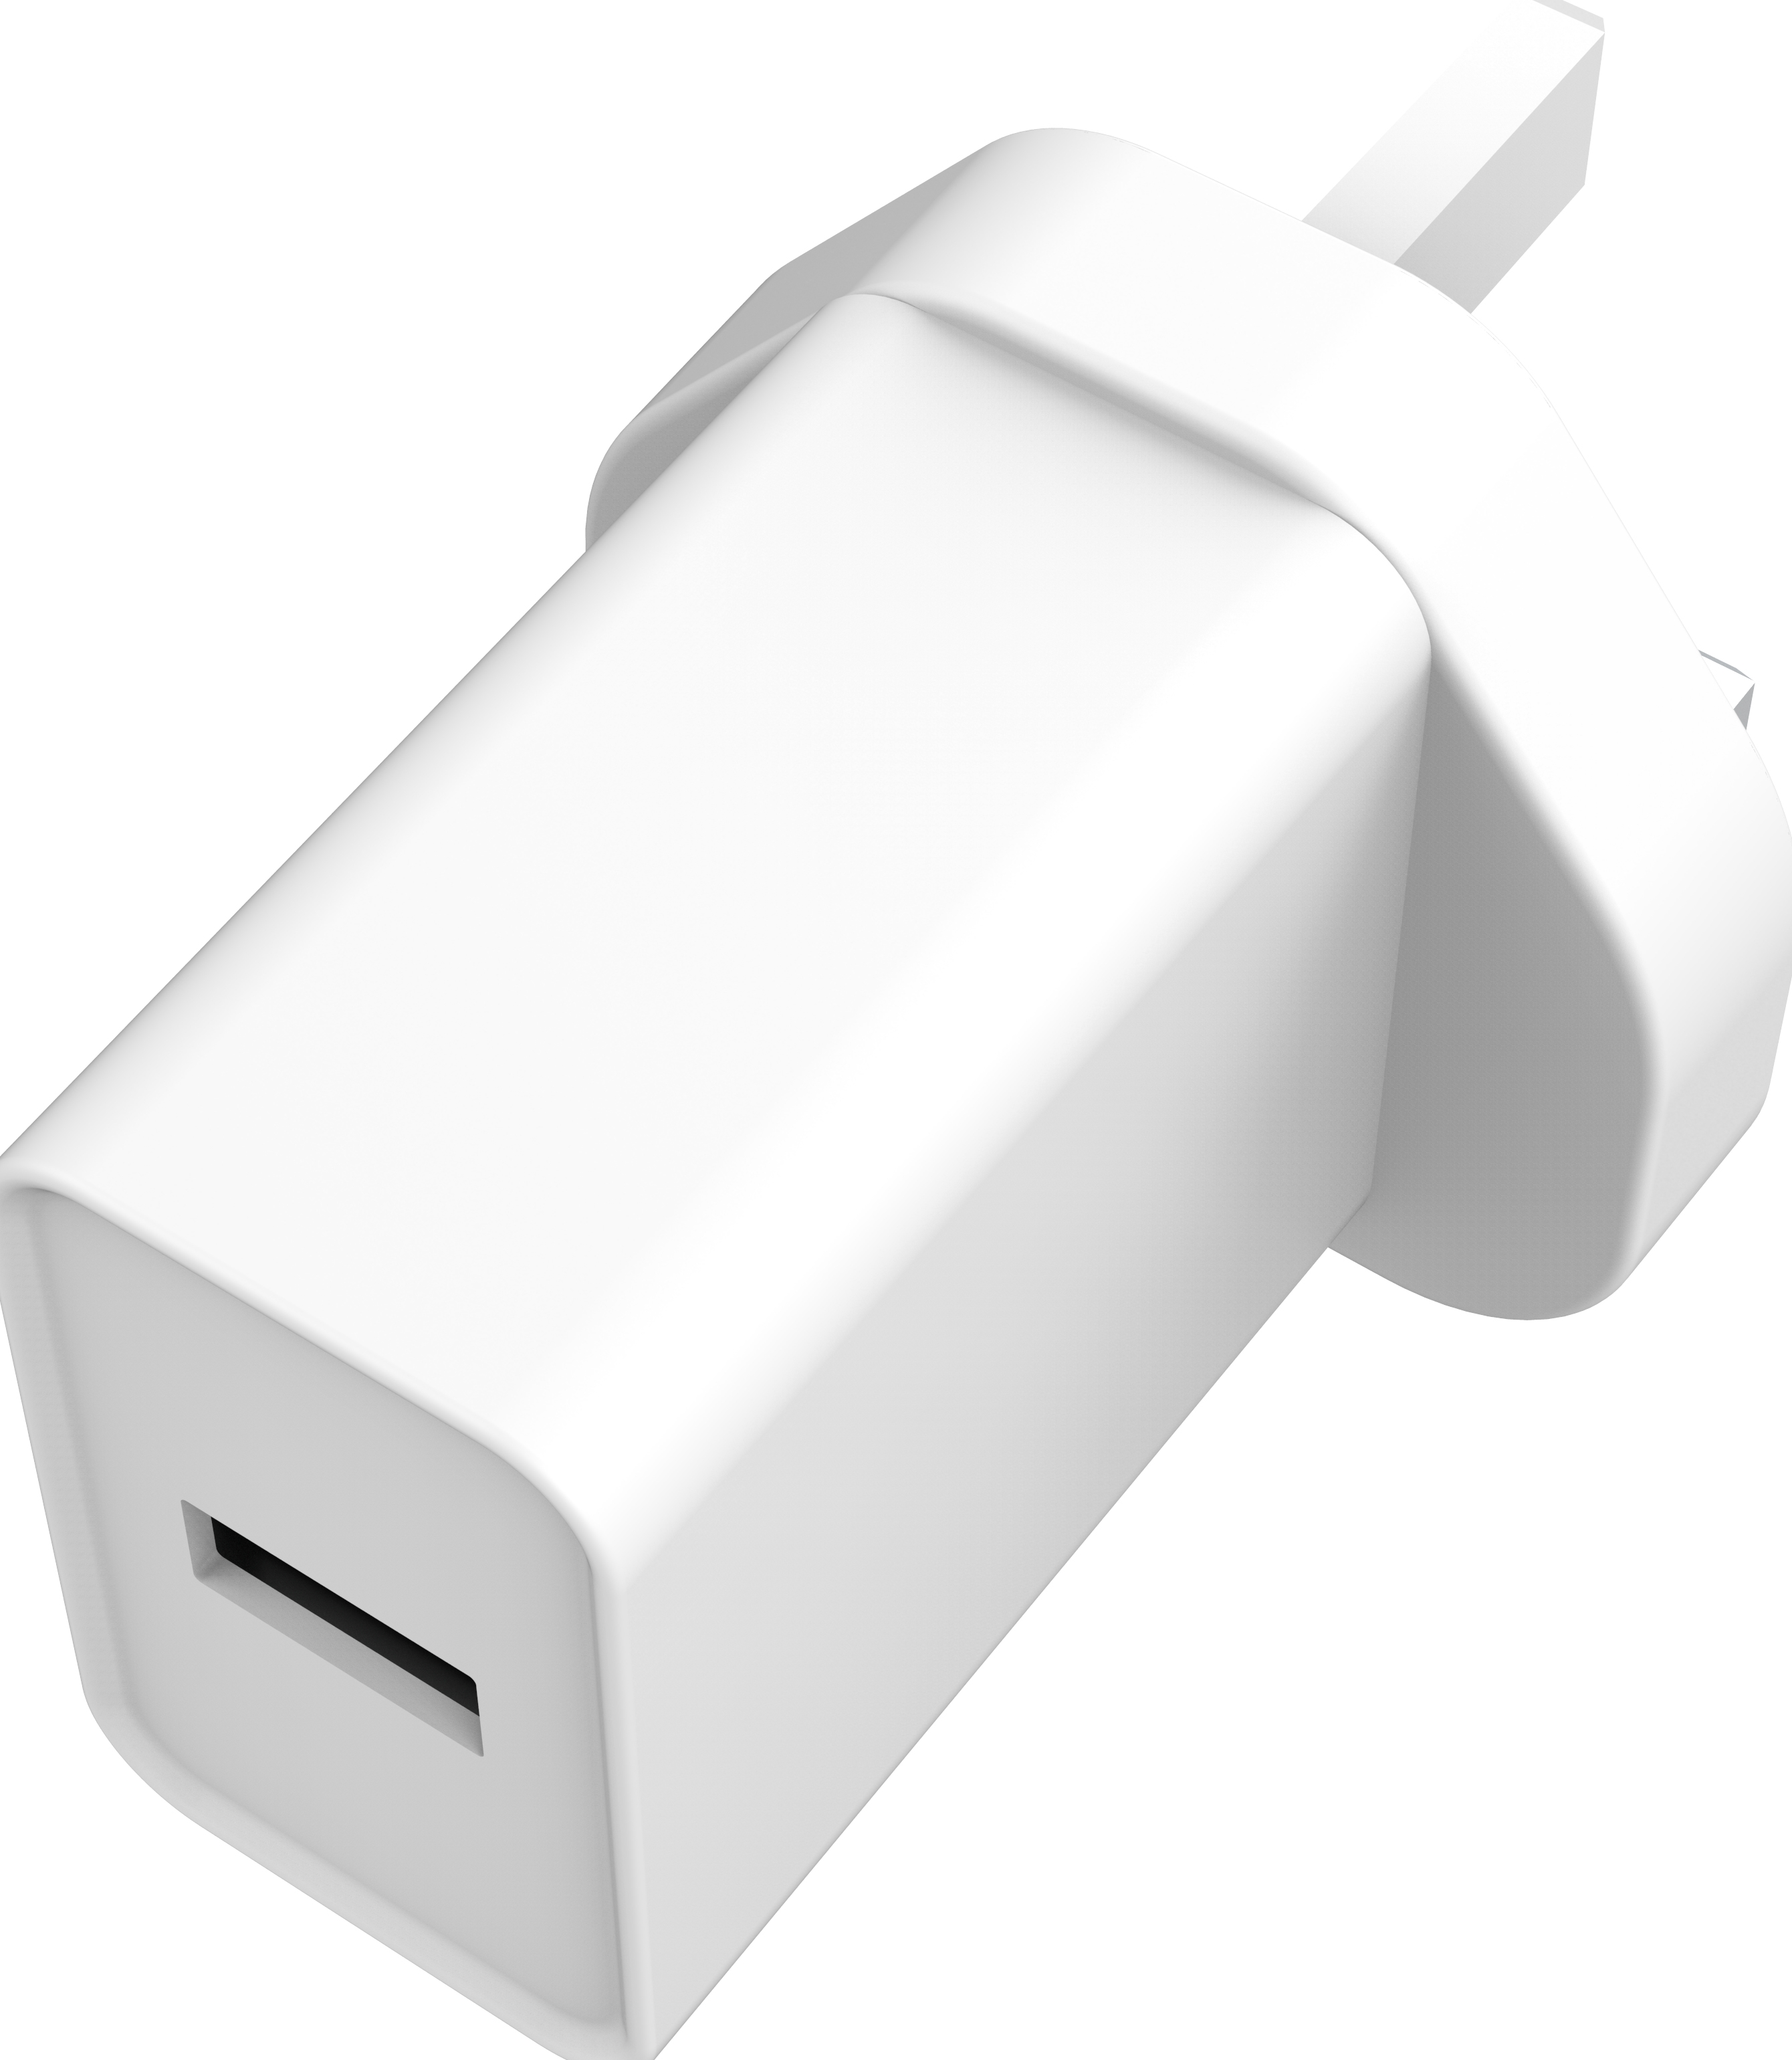 Home Charger UK 12W 1 x USB-A Input: 230V UK